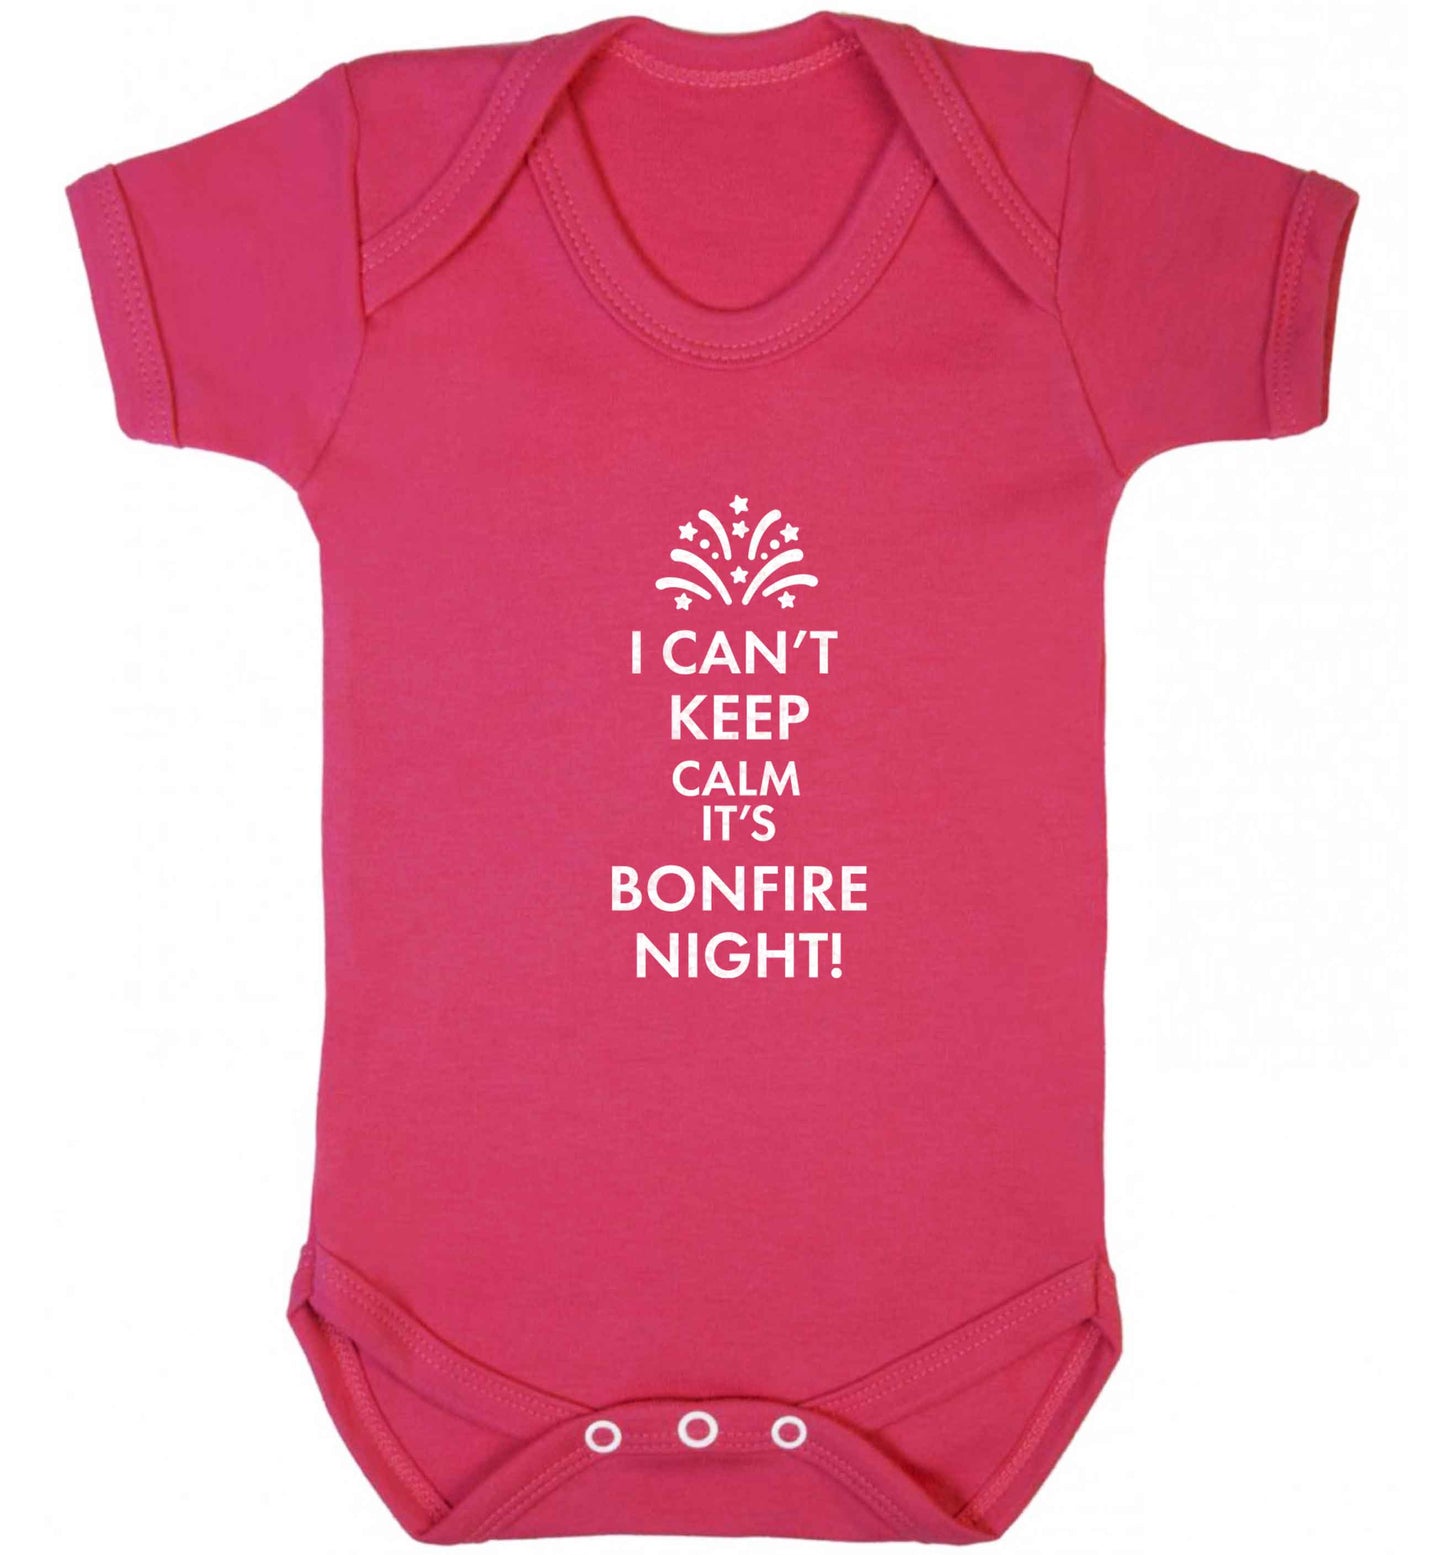 I can't keep calm its bonfire night baby vest dark pink 18-24 months